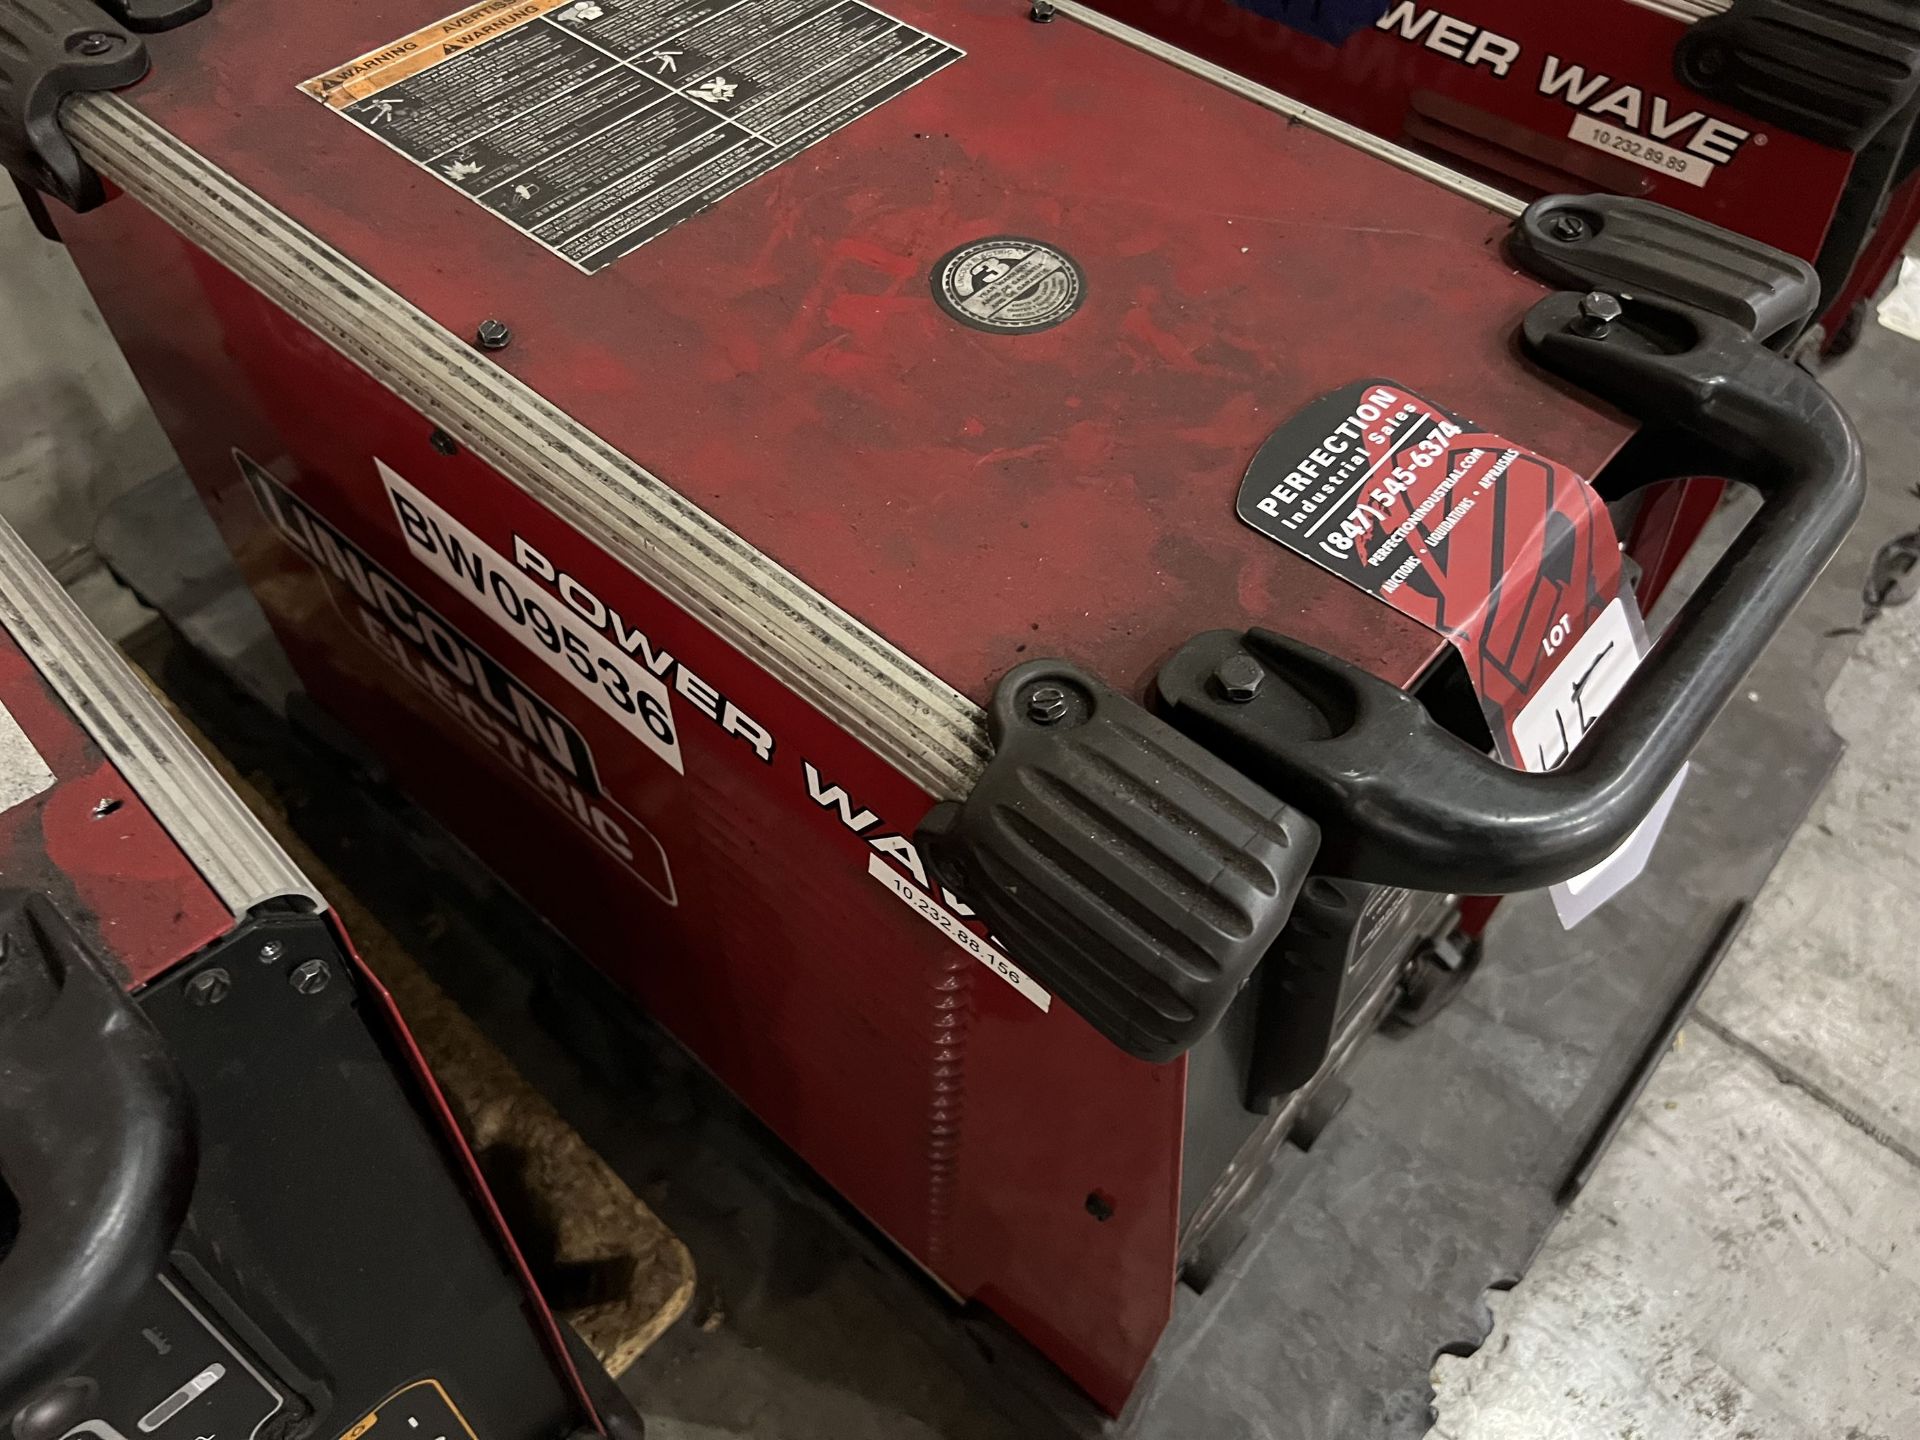 Lincoln S350 Power Wave welder s/n U1150108169 (Located at 7300 Lone Tree Rd, Victoria, TX 77905) - Image 4 of 4